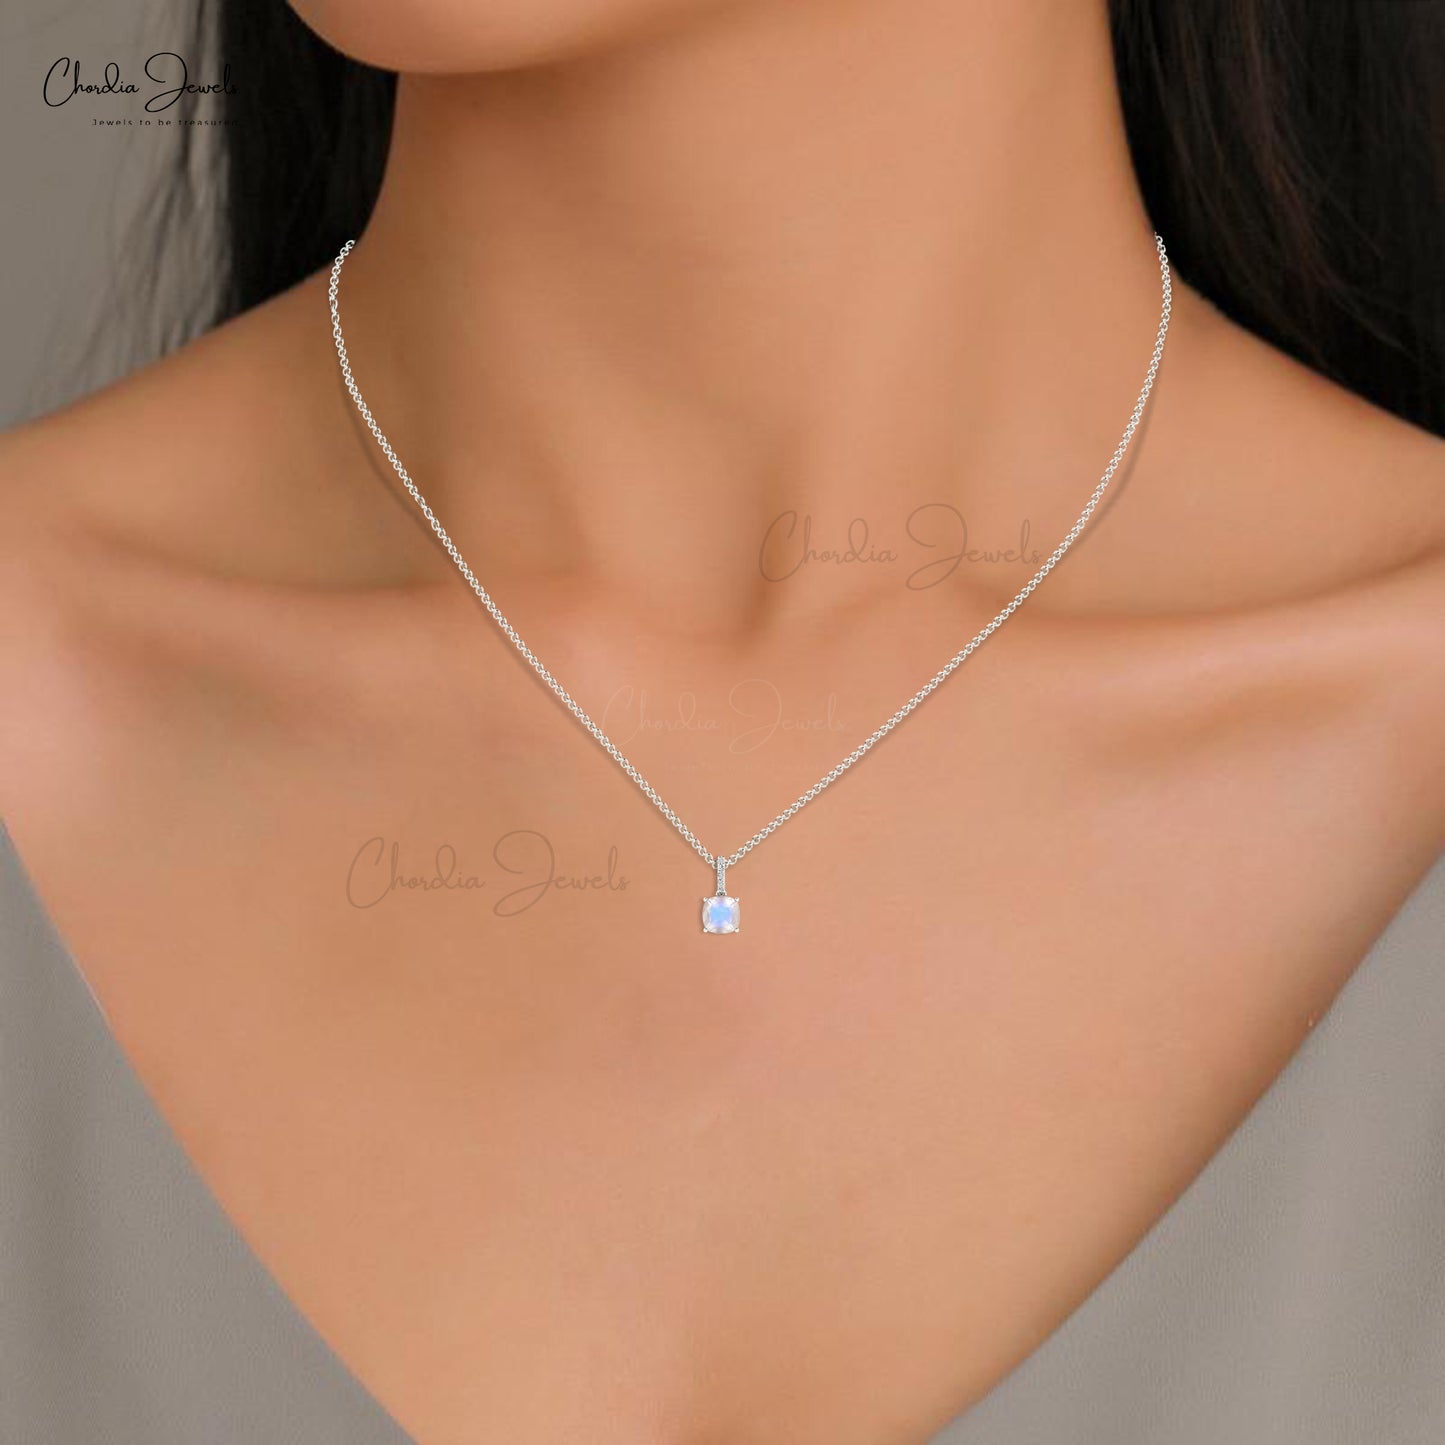 Buy Simple Diamond Necklace Minimalist Necklace 14K Rose Gold Diamond  Necklace Delicate Necklace Solitaire Necklace Round Cut Online in India -  Etsy